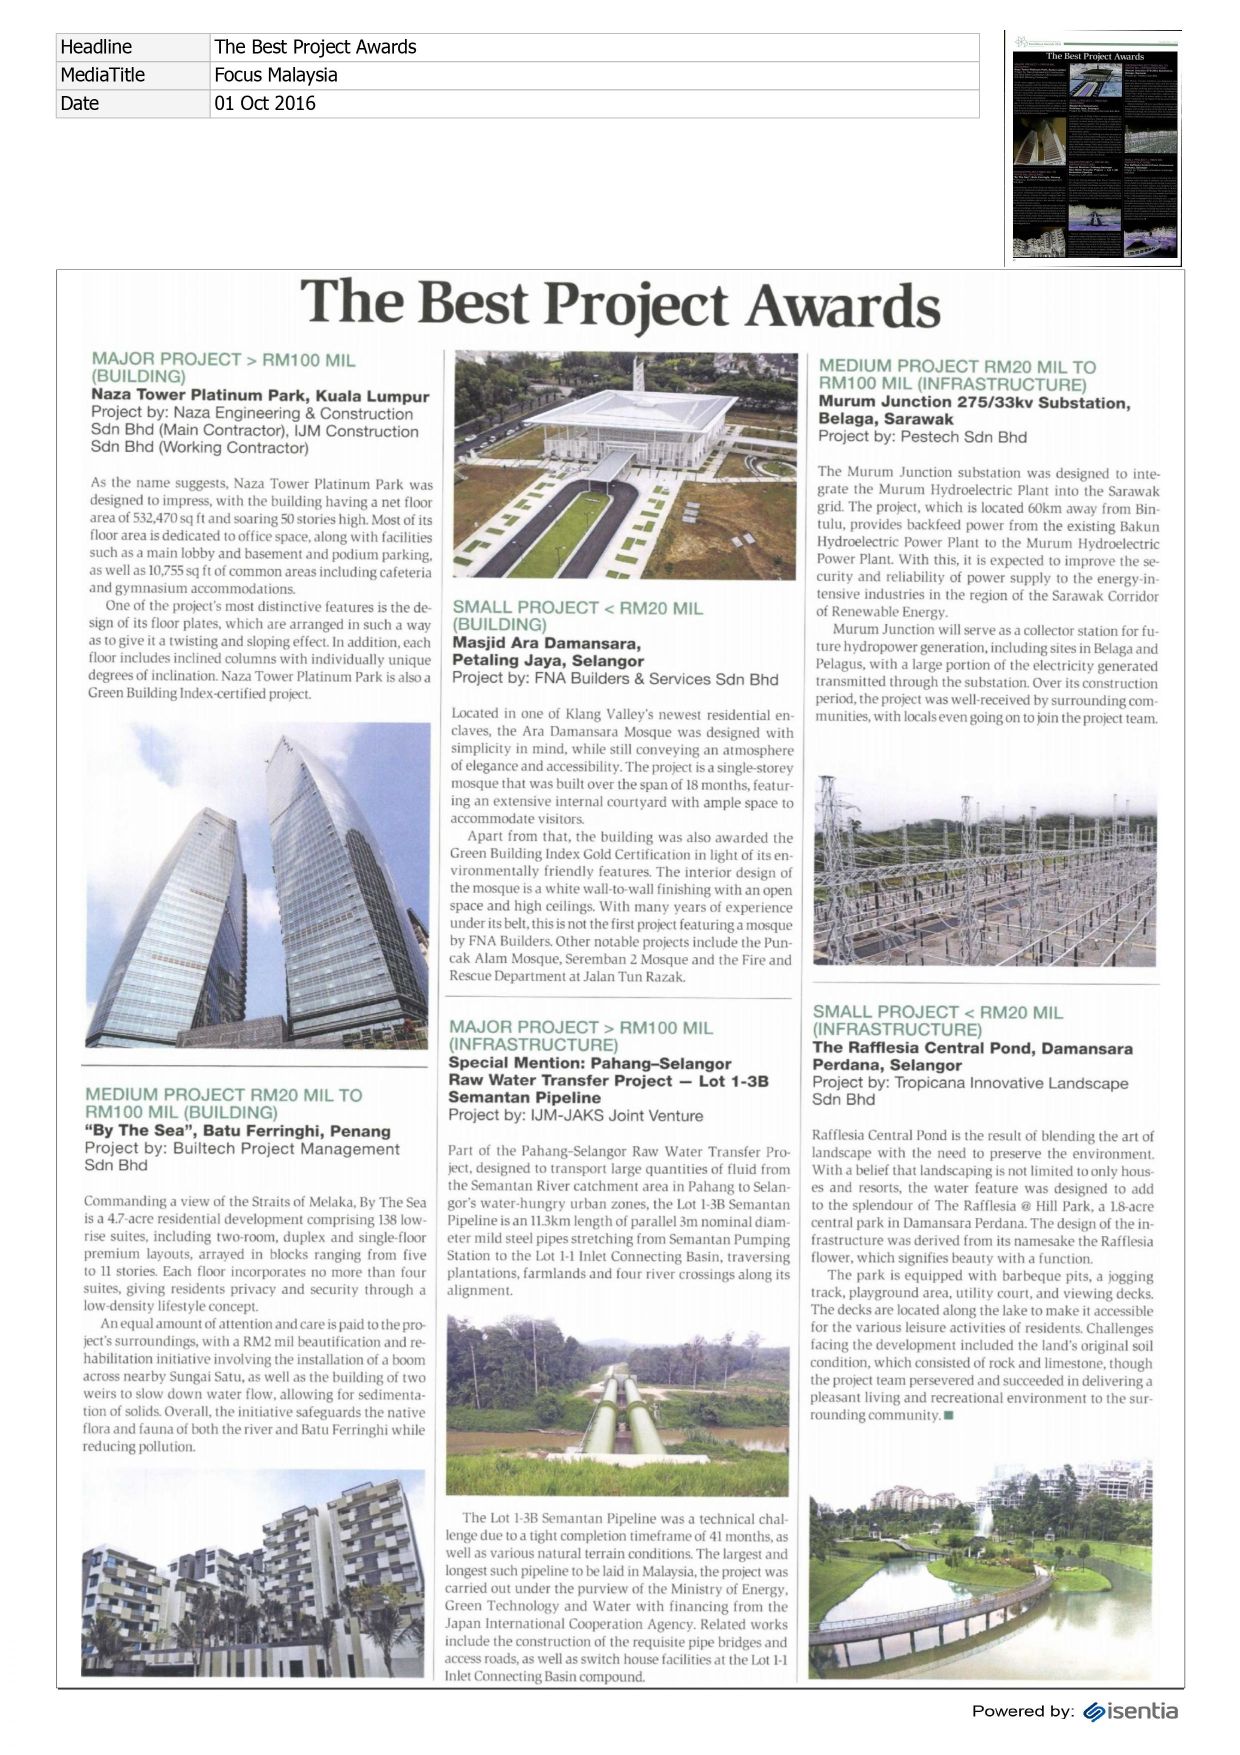 The Best Project Awards